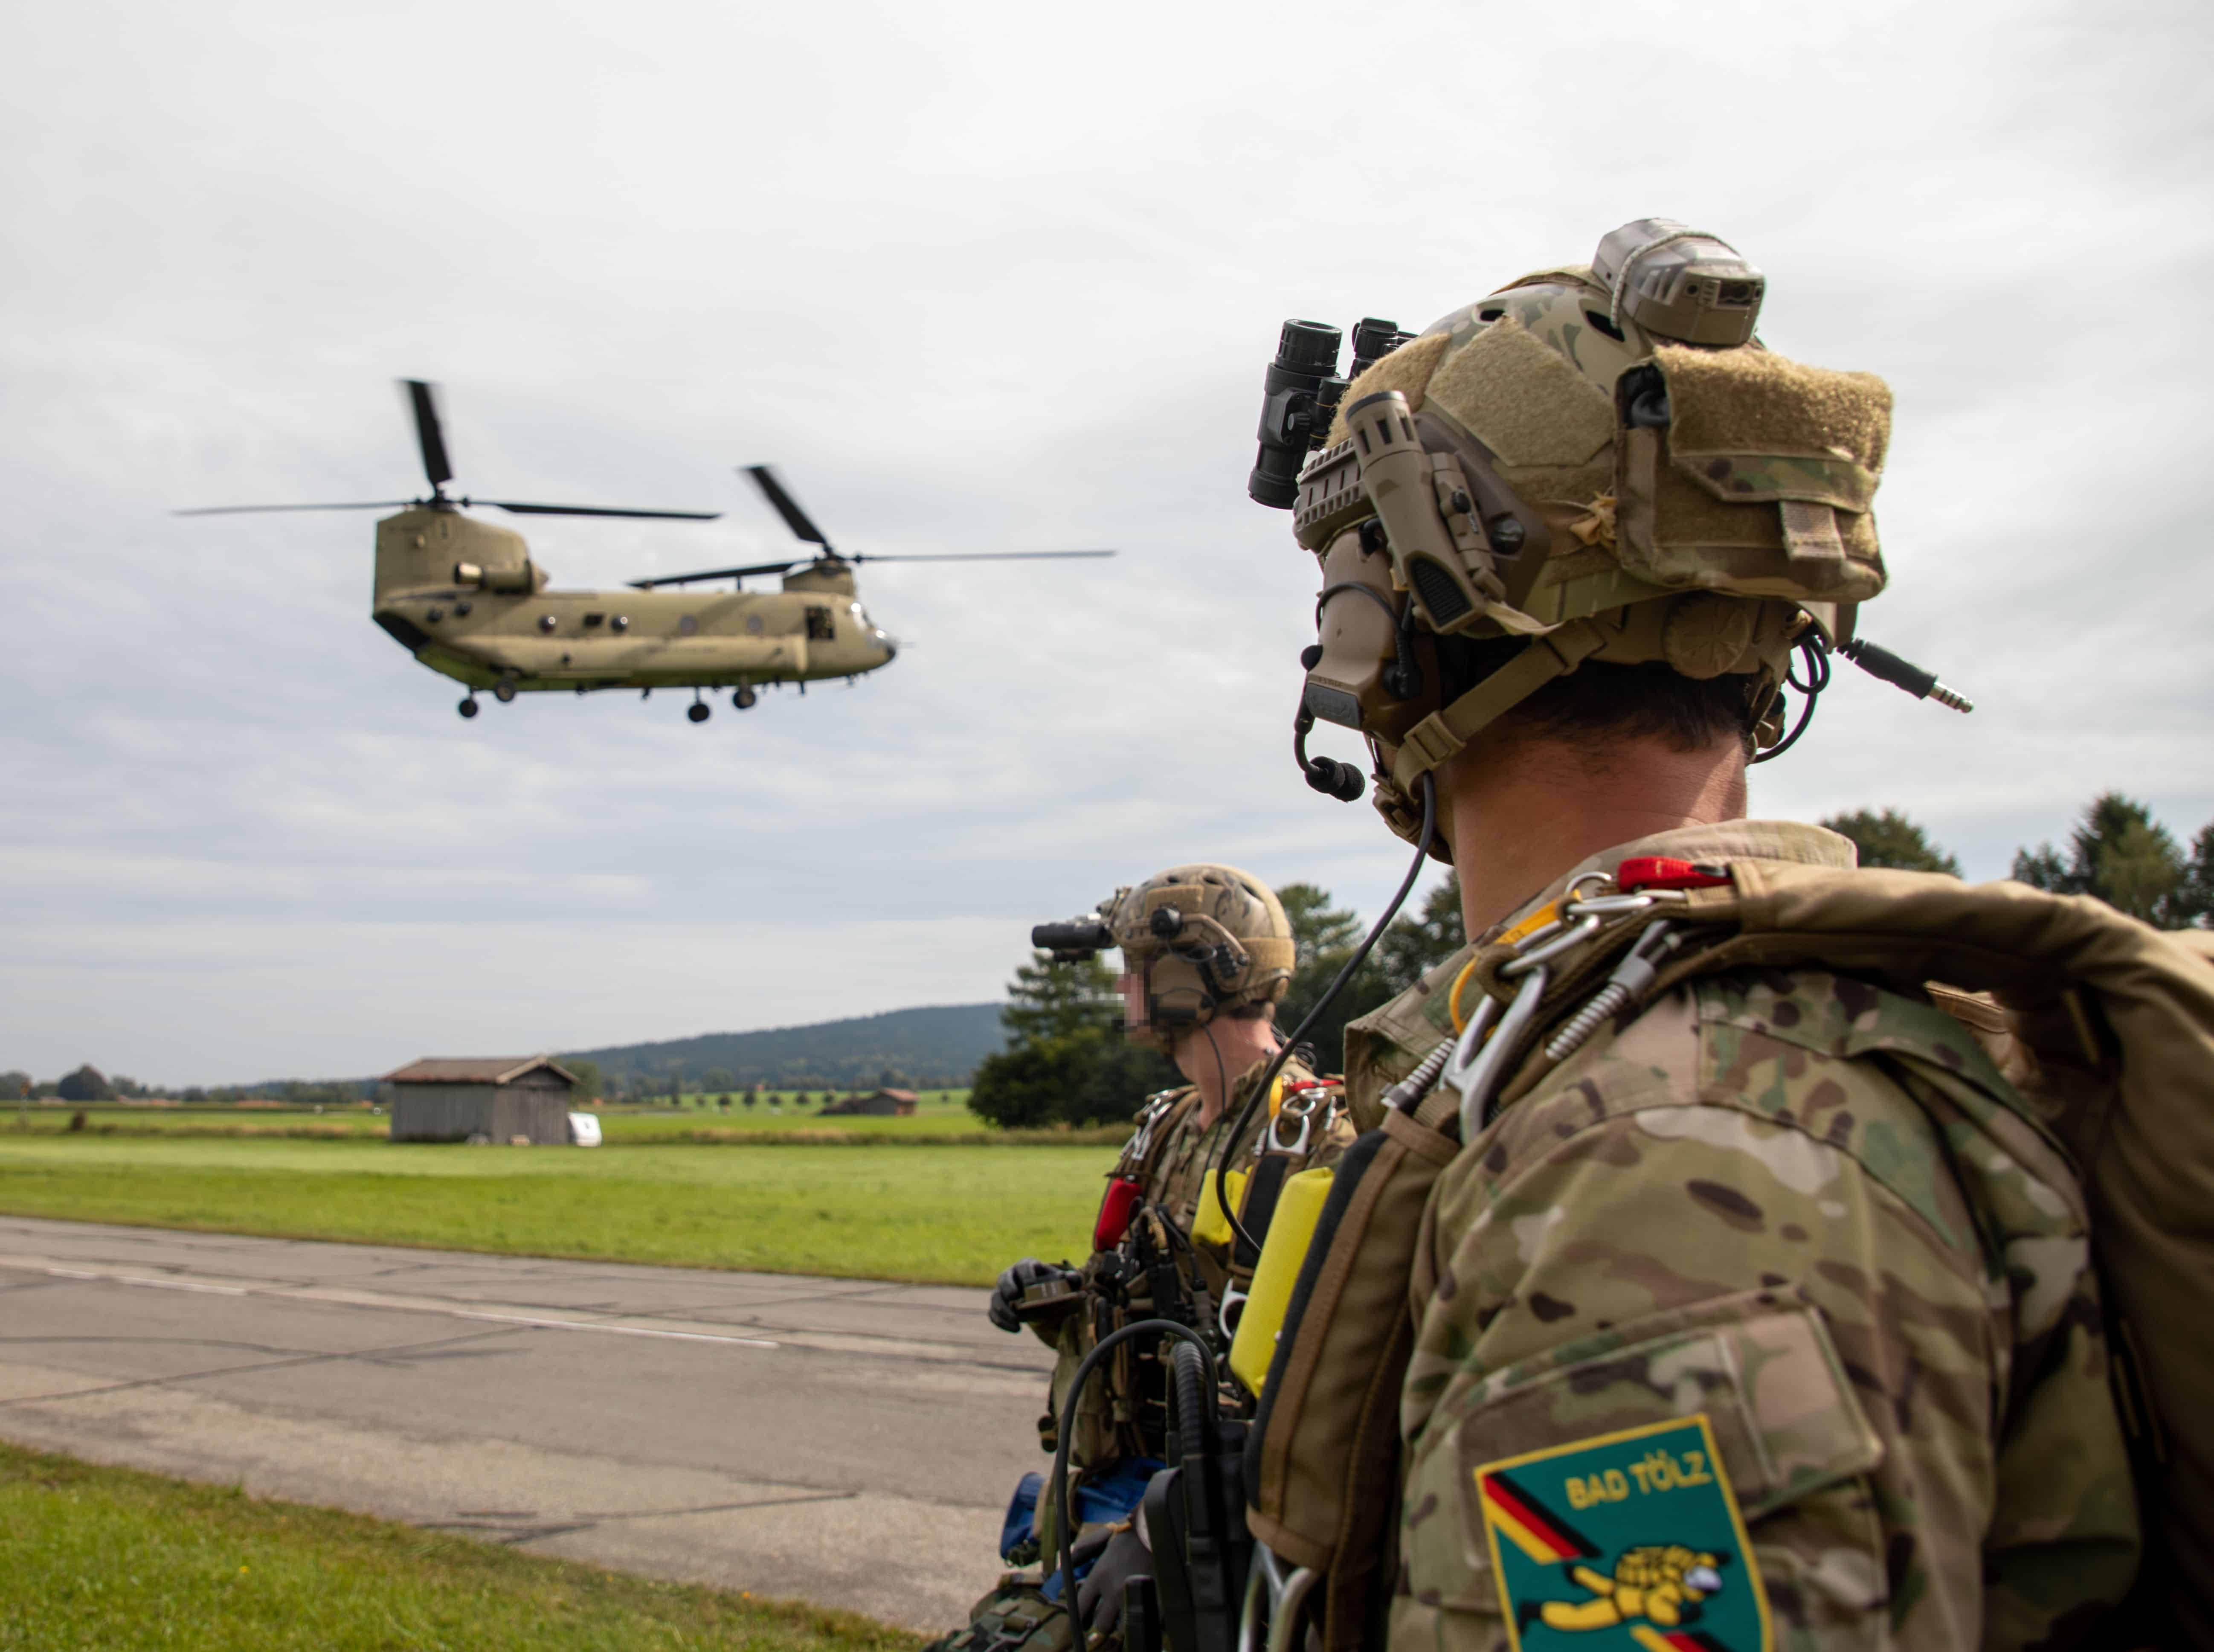 U.S. Special Operations Command Europe Soldiers from 10th Special Forces Group conduct High Altitude High Opening (HAHO) and High Altitude Low Opening (HALO) training, designed to enhance the readiness of Airborne troops to meet and defeat any challenge on the modern battlefield, in Bad Tölz, Germany September 15, 2021.